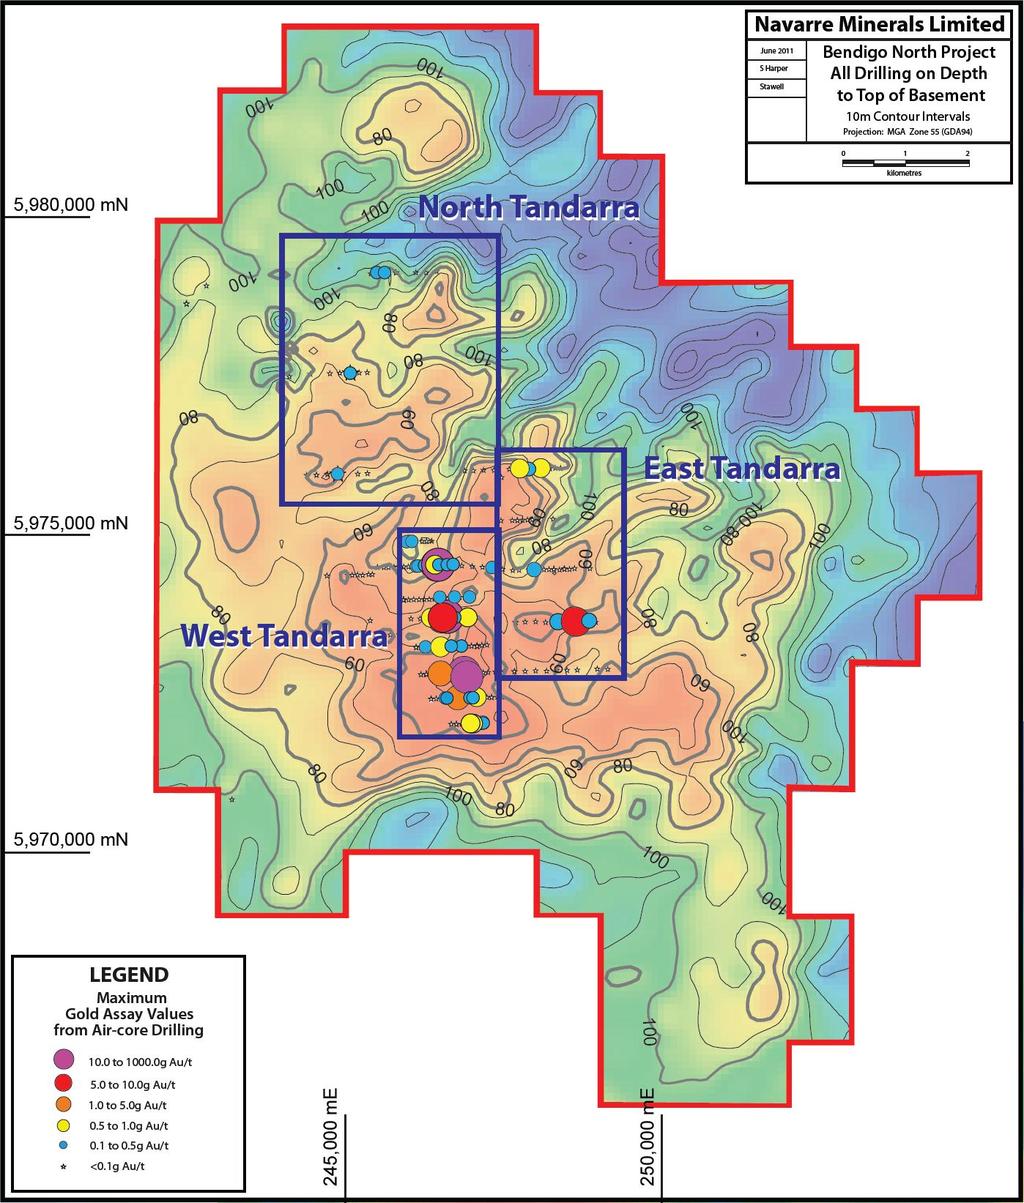 Bendigo North Gold Project 7km zone of gold bearing quartz mineralisation in basement rocks buried under cover identified Cover 20 110m thick